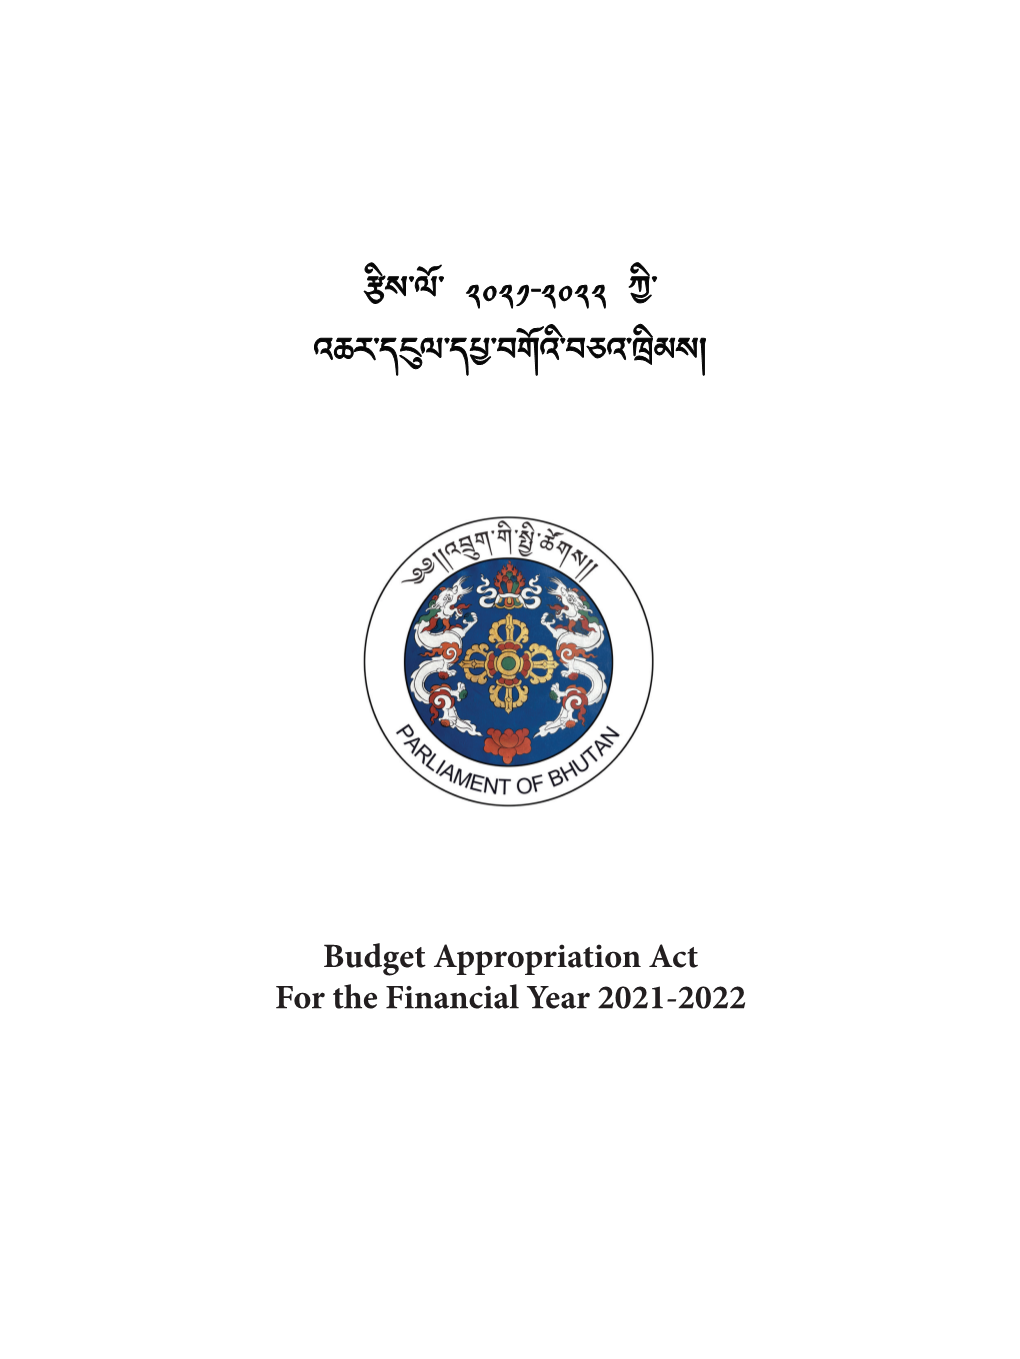 Budget Appropriation Act for the Financial Year 2021-2022 རྩིས